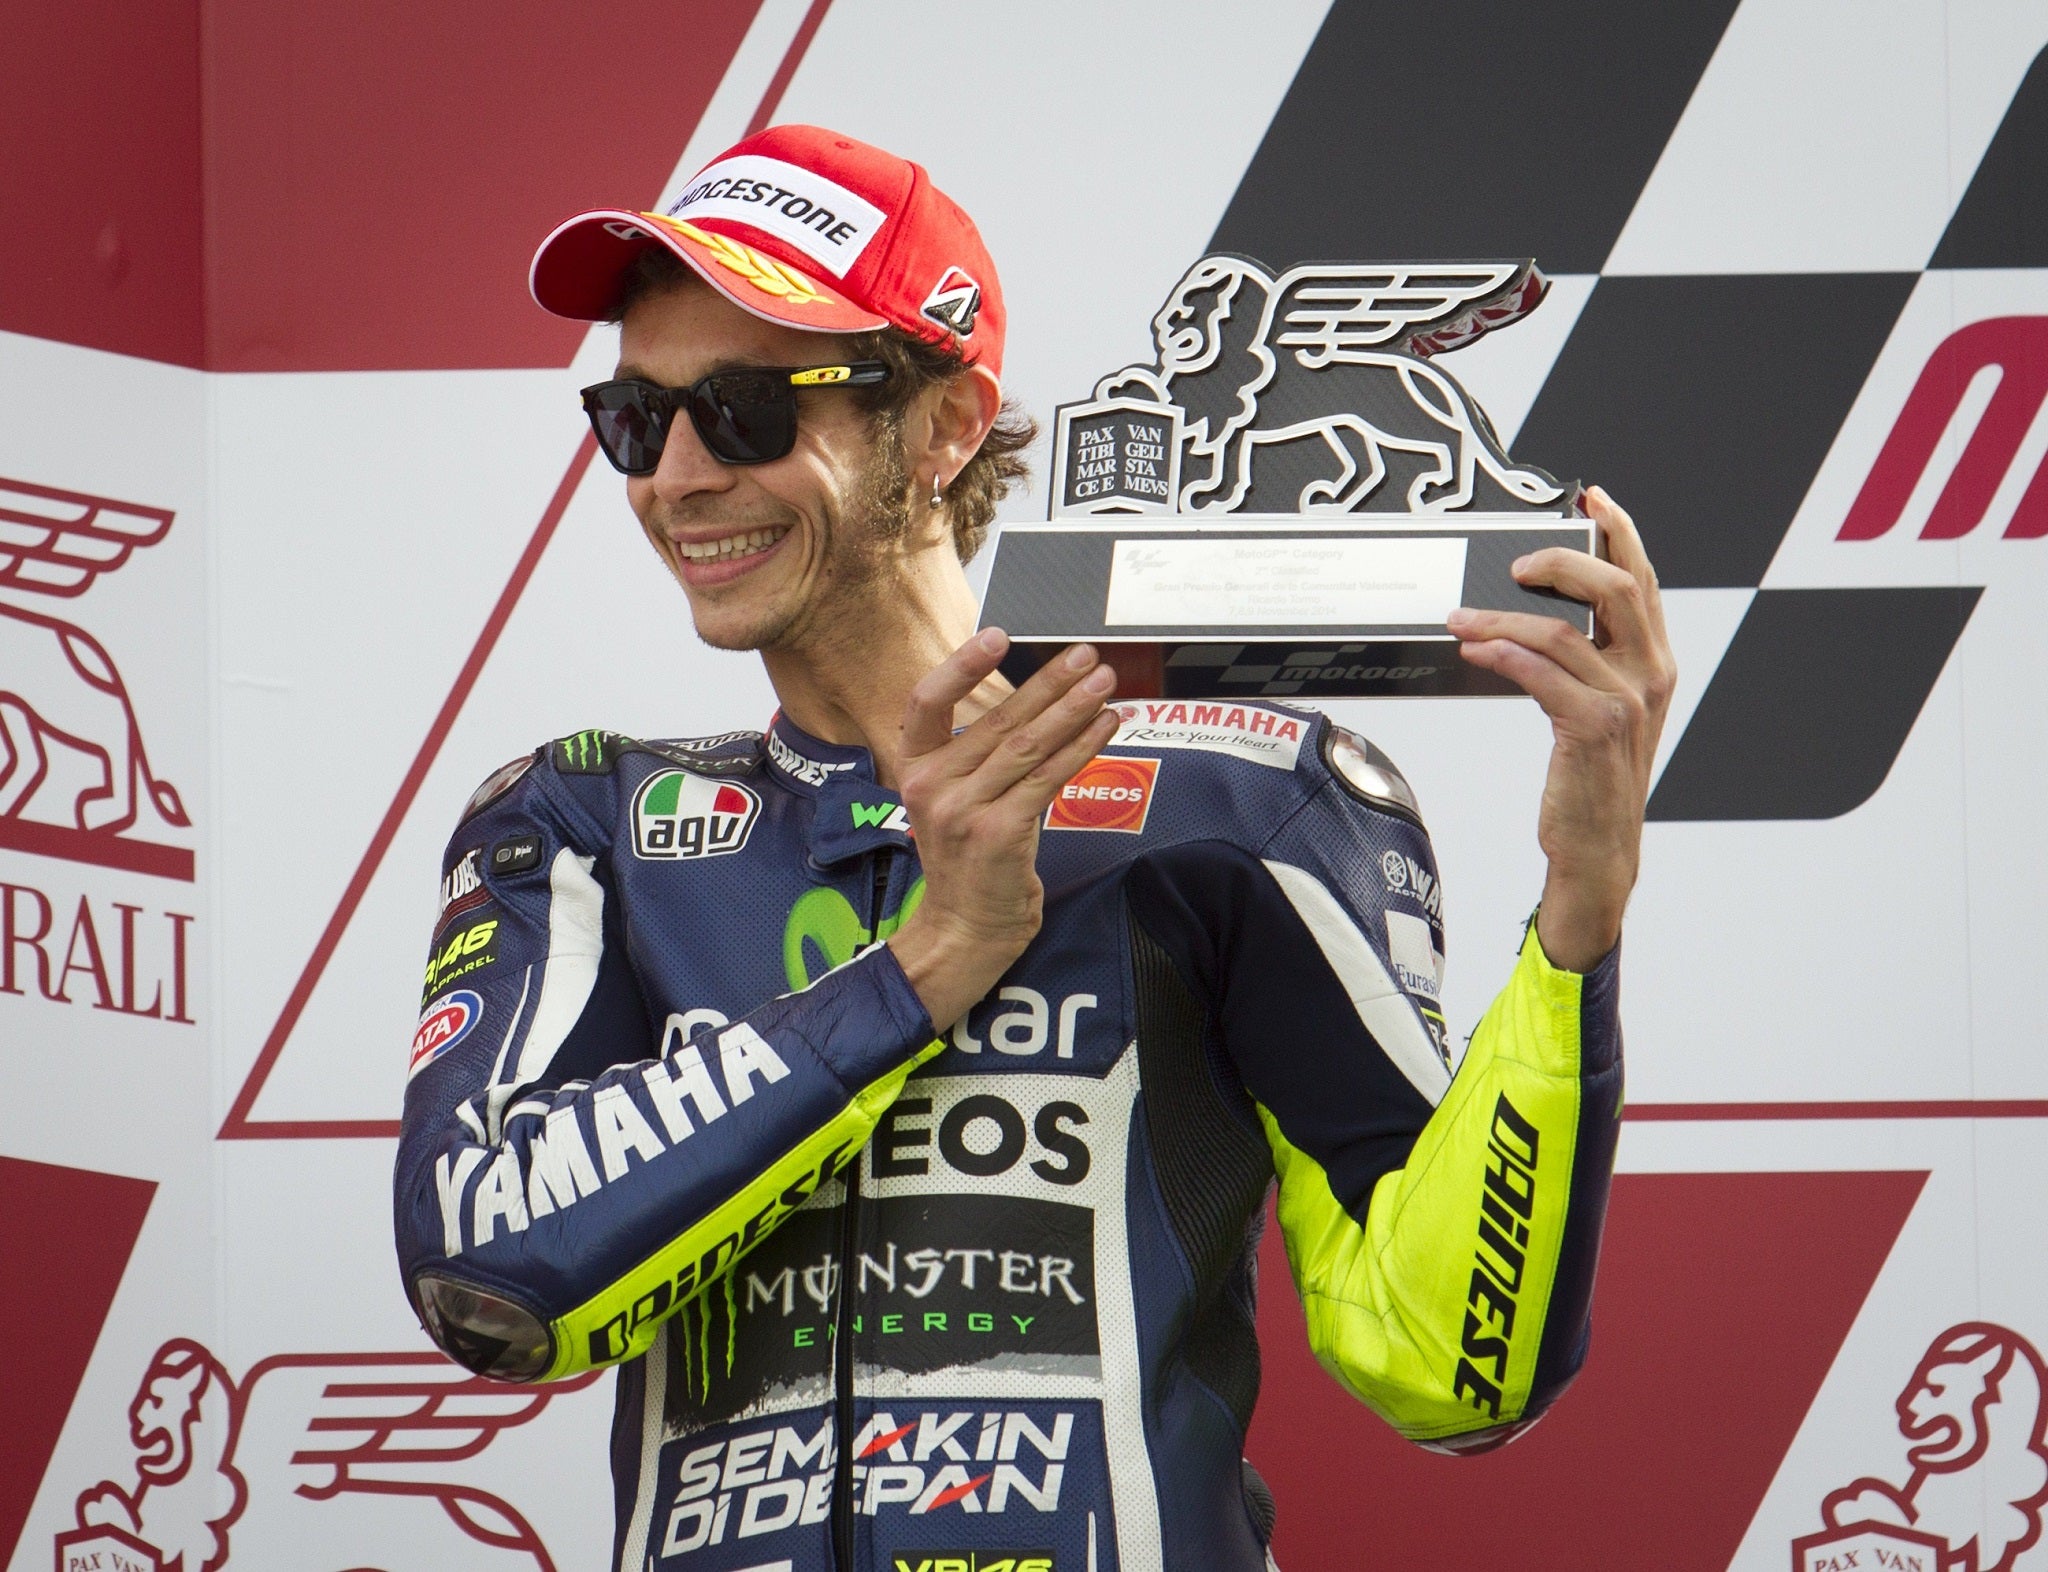 Valentino Rossi took second in Valencia to secure second in the MotoGP championship